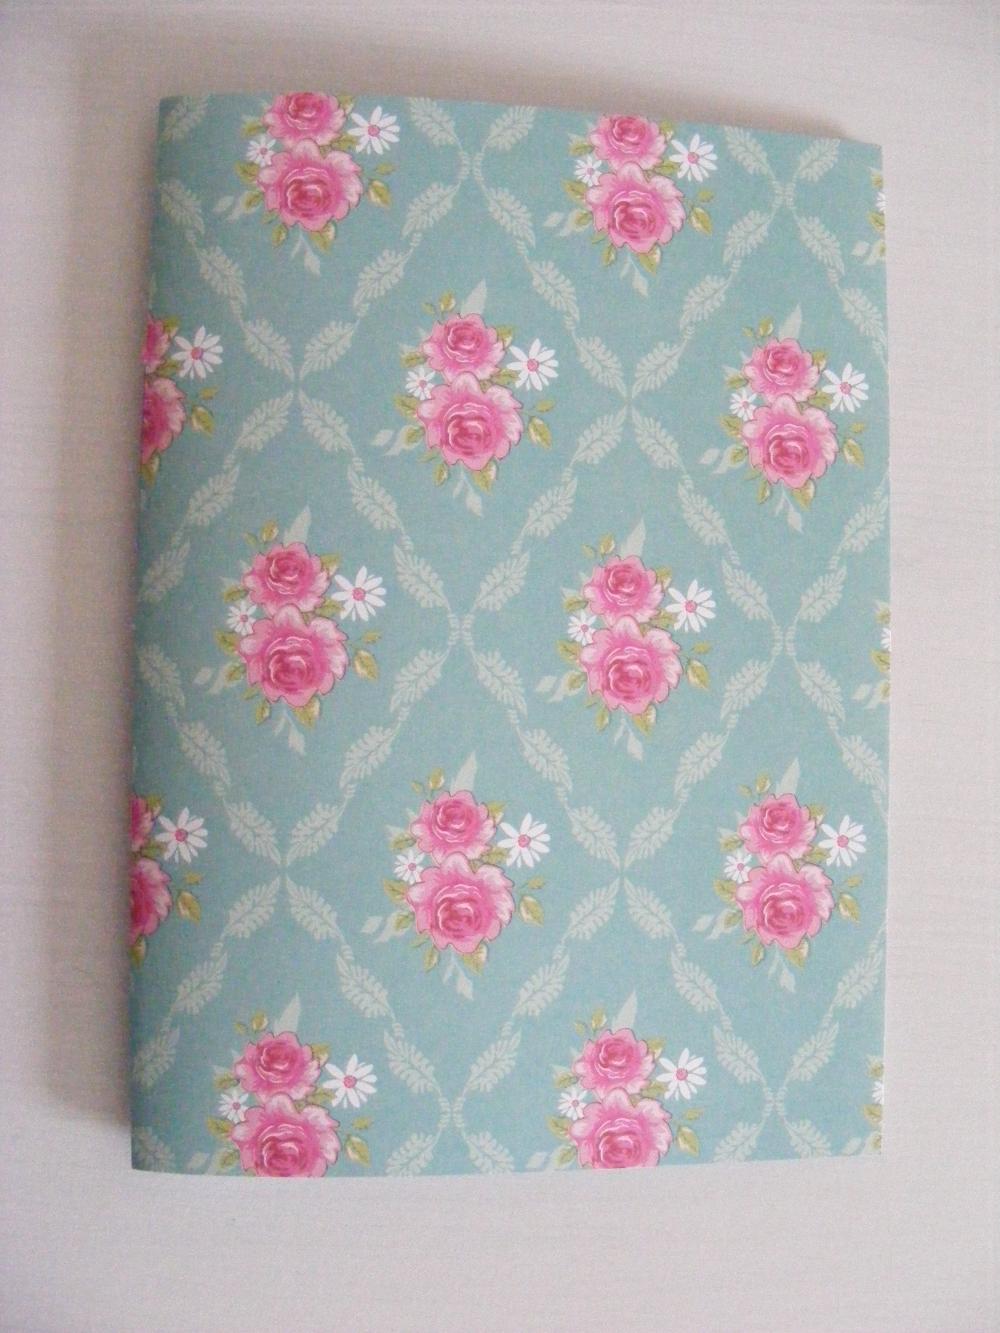 Handmade A5 Notebook With Plain Pink And Turquoise Pages